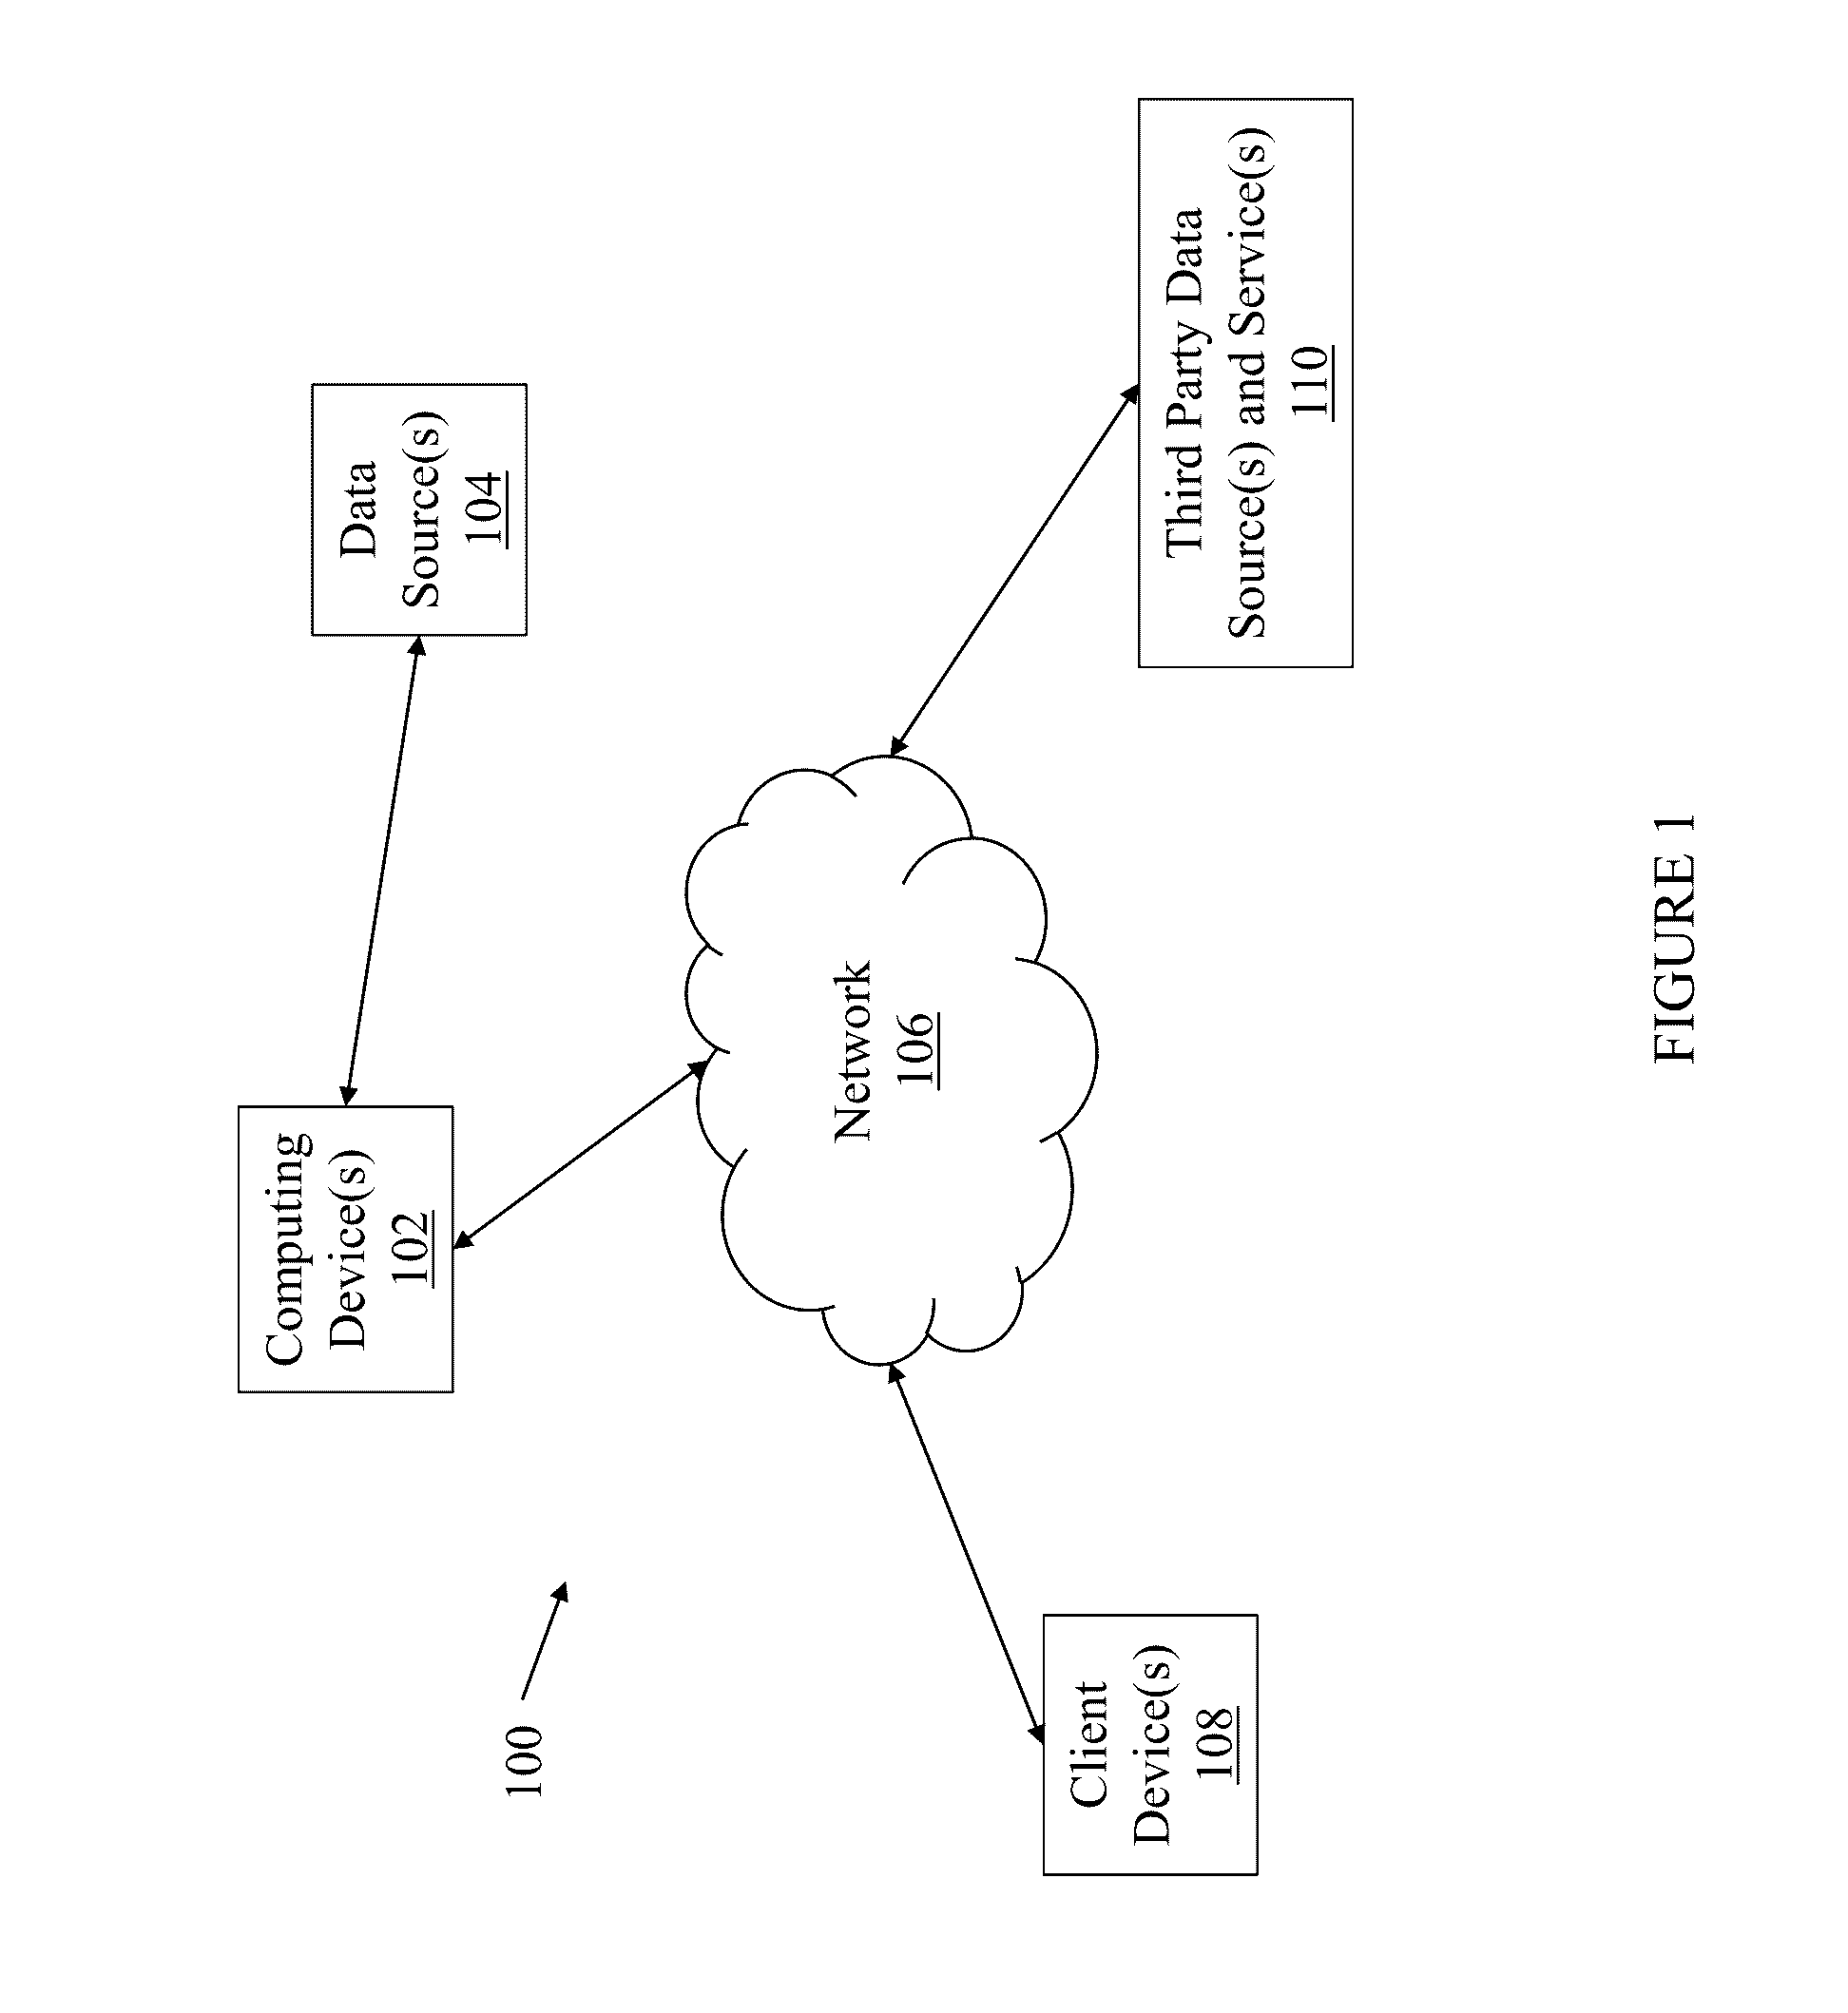 System and method for monitoring and anaylzing animal related data